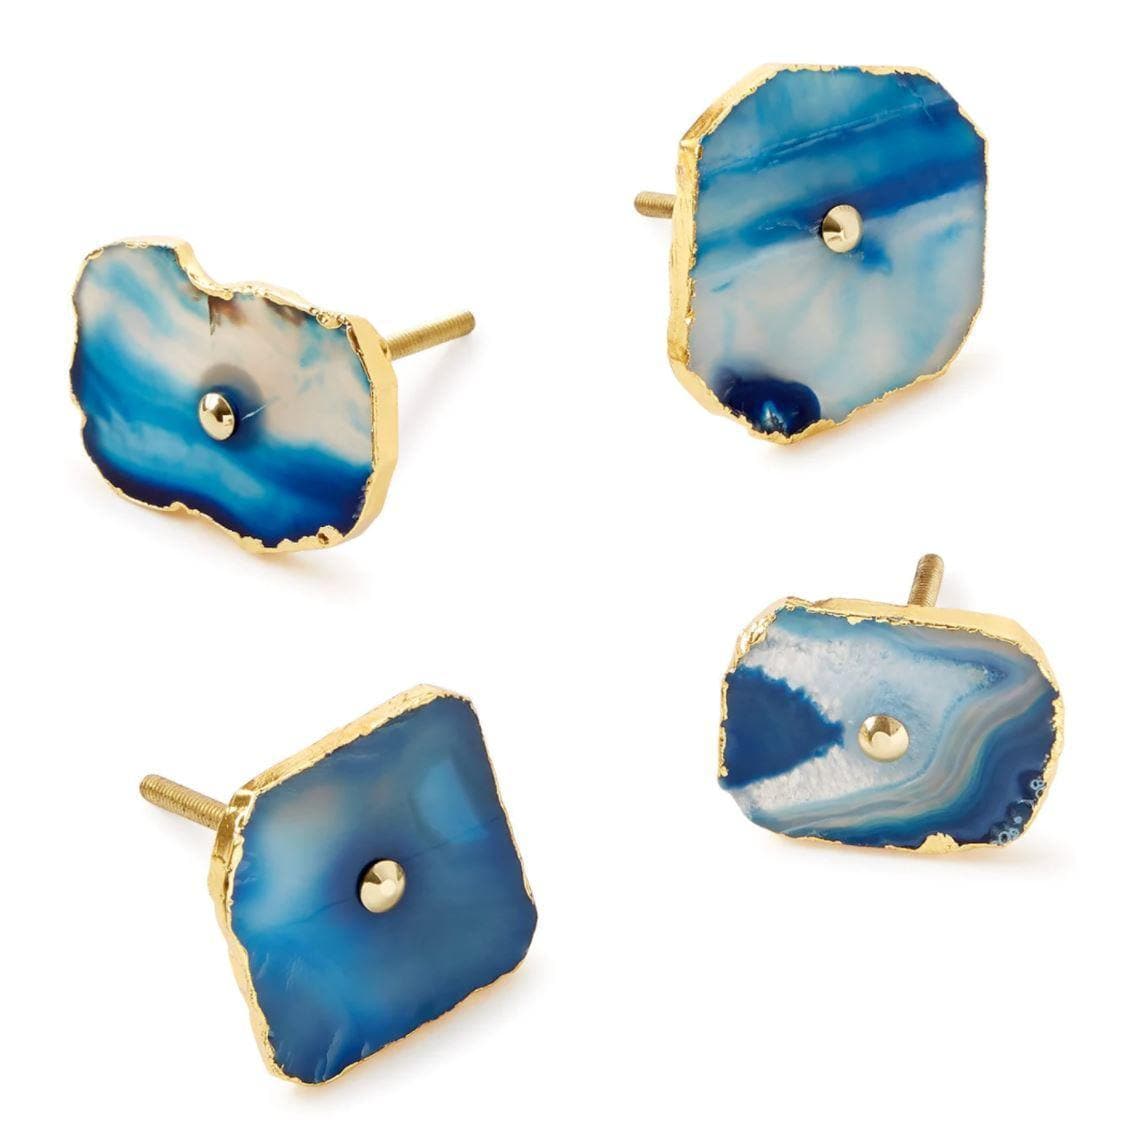 Blue Agate Cabinet Drawer Pulls - MAIA HOMES